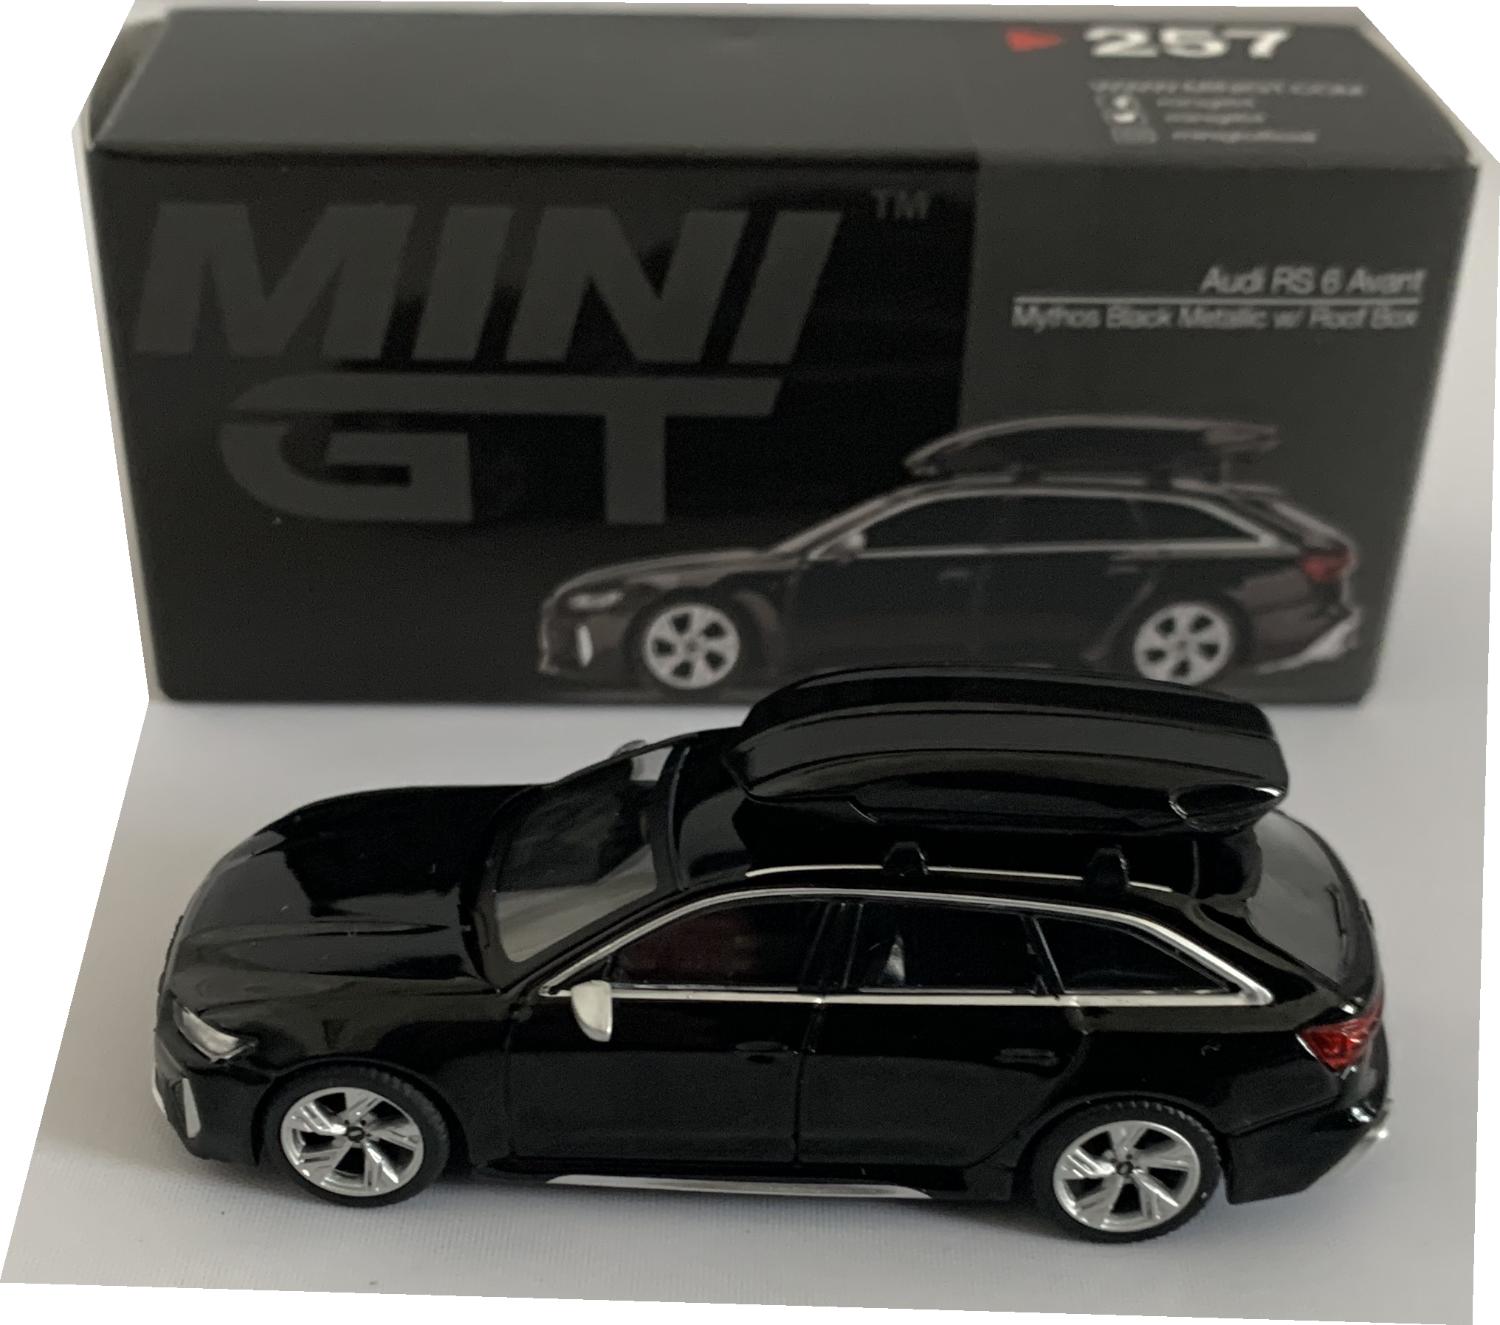 A good reproduction of the Audi RS 6 Avant with detail throughout, all authentically recreated. The model is presented in a box, the car is approx. 8 cm long and the box is 10 cm long